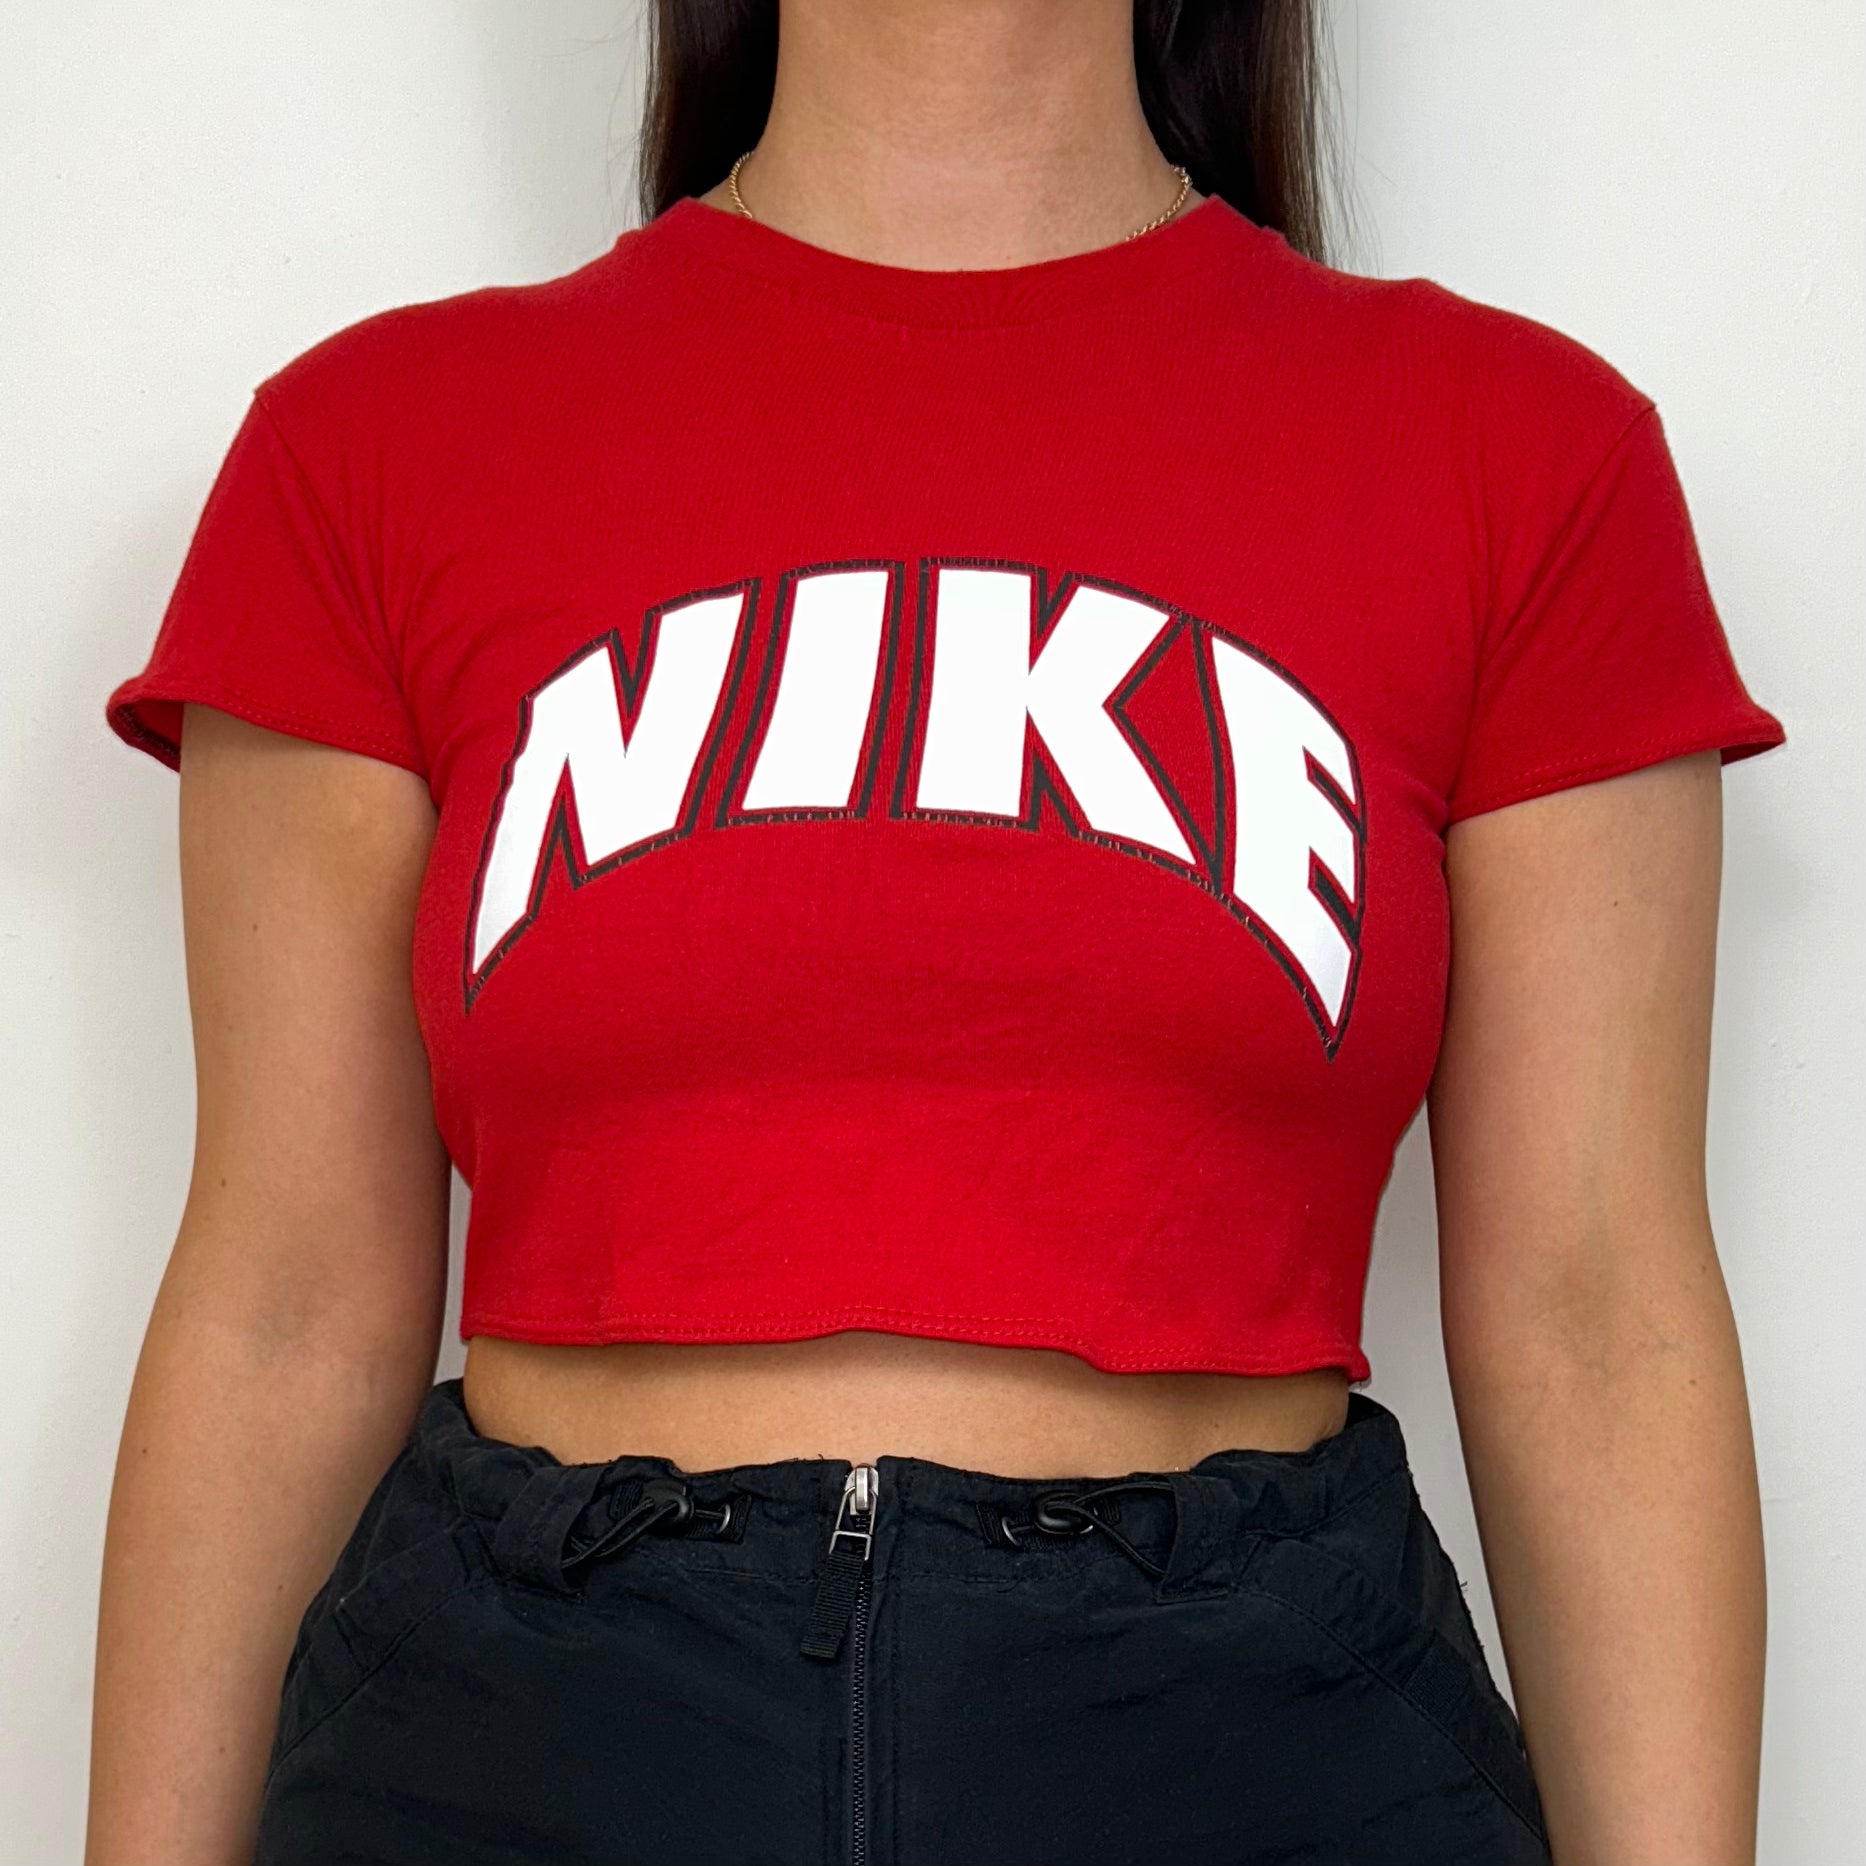 close up of red short sleeve crop top with white nike logo shown on a model wearing a black skirt